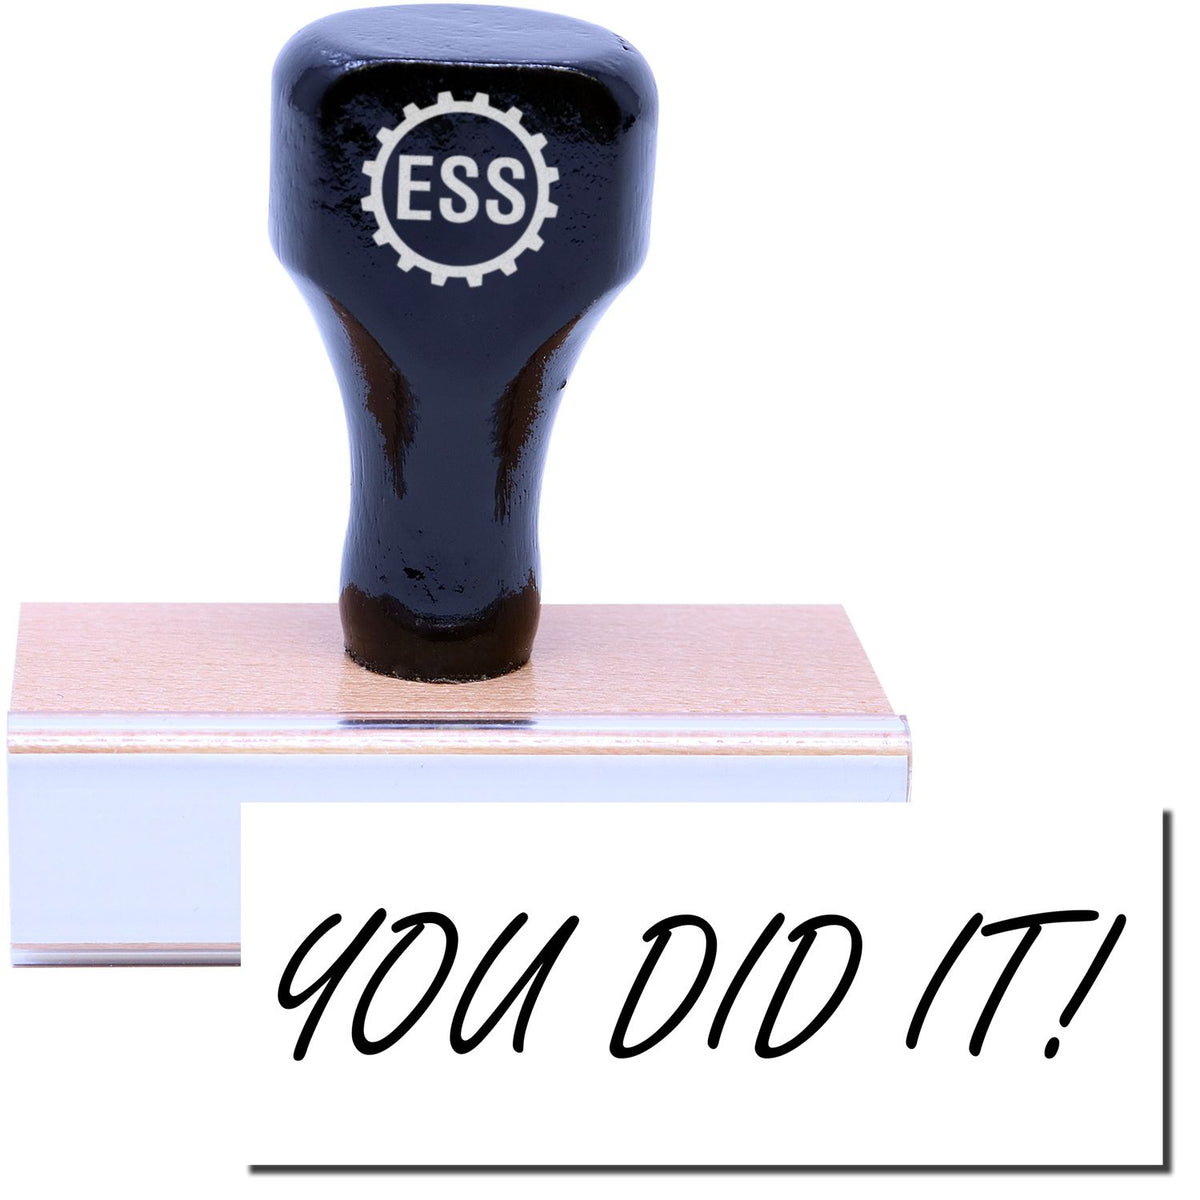 A stock office rubber stamp with a stamped image showing how the text &quot;YOU DID IT!&quot; is displayed after stamping.